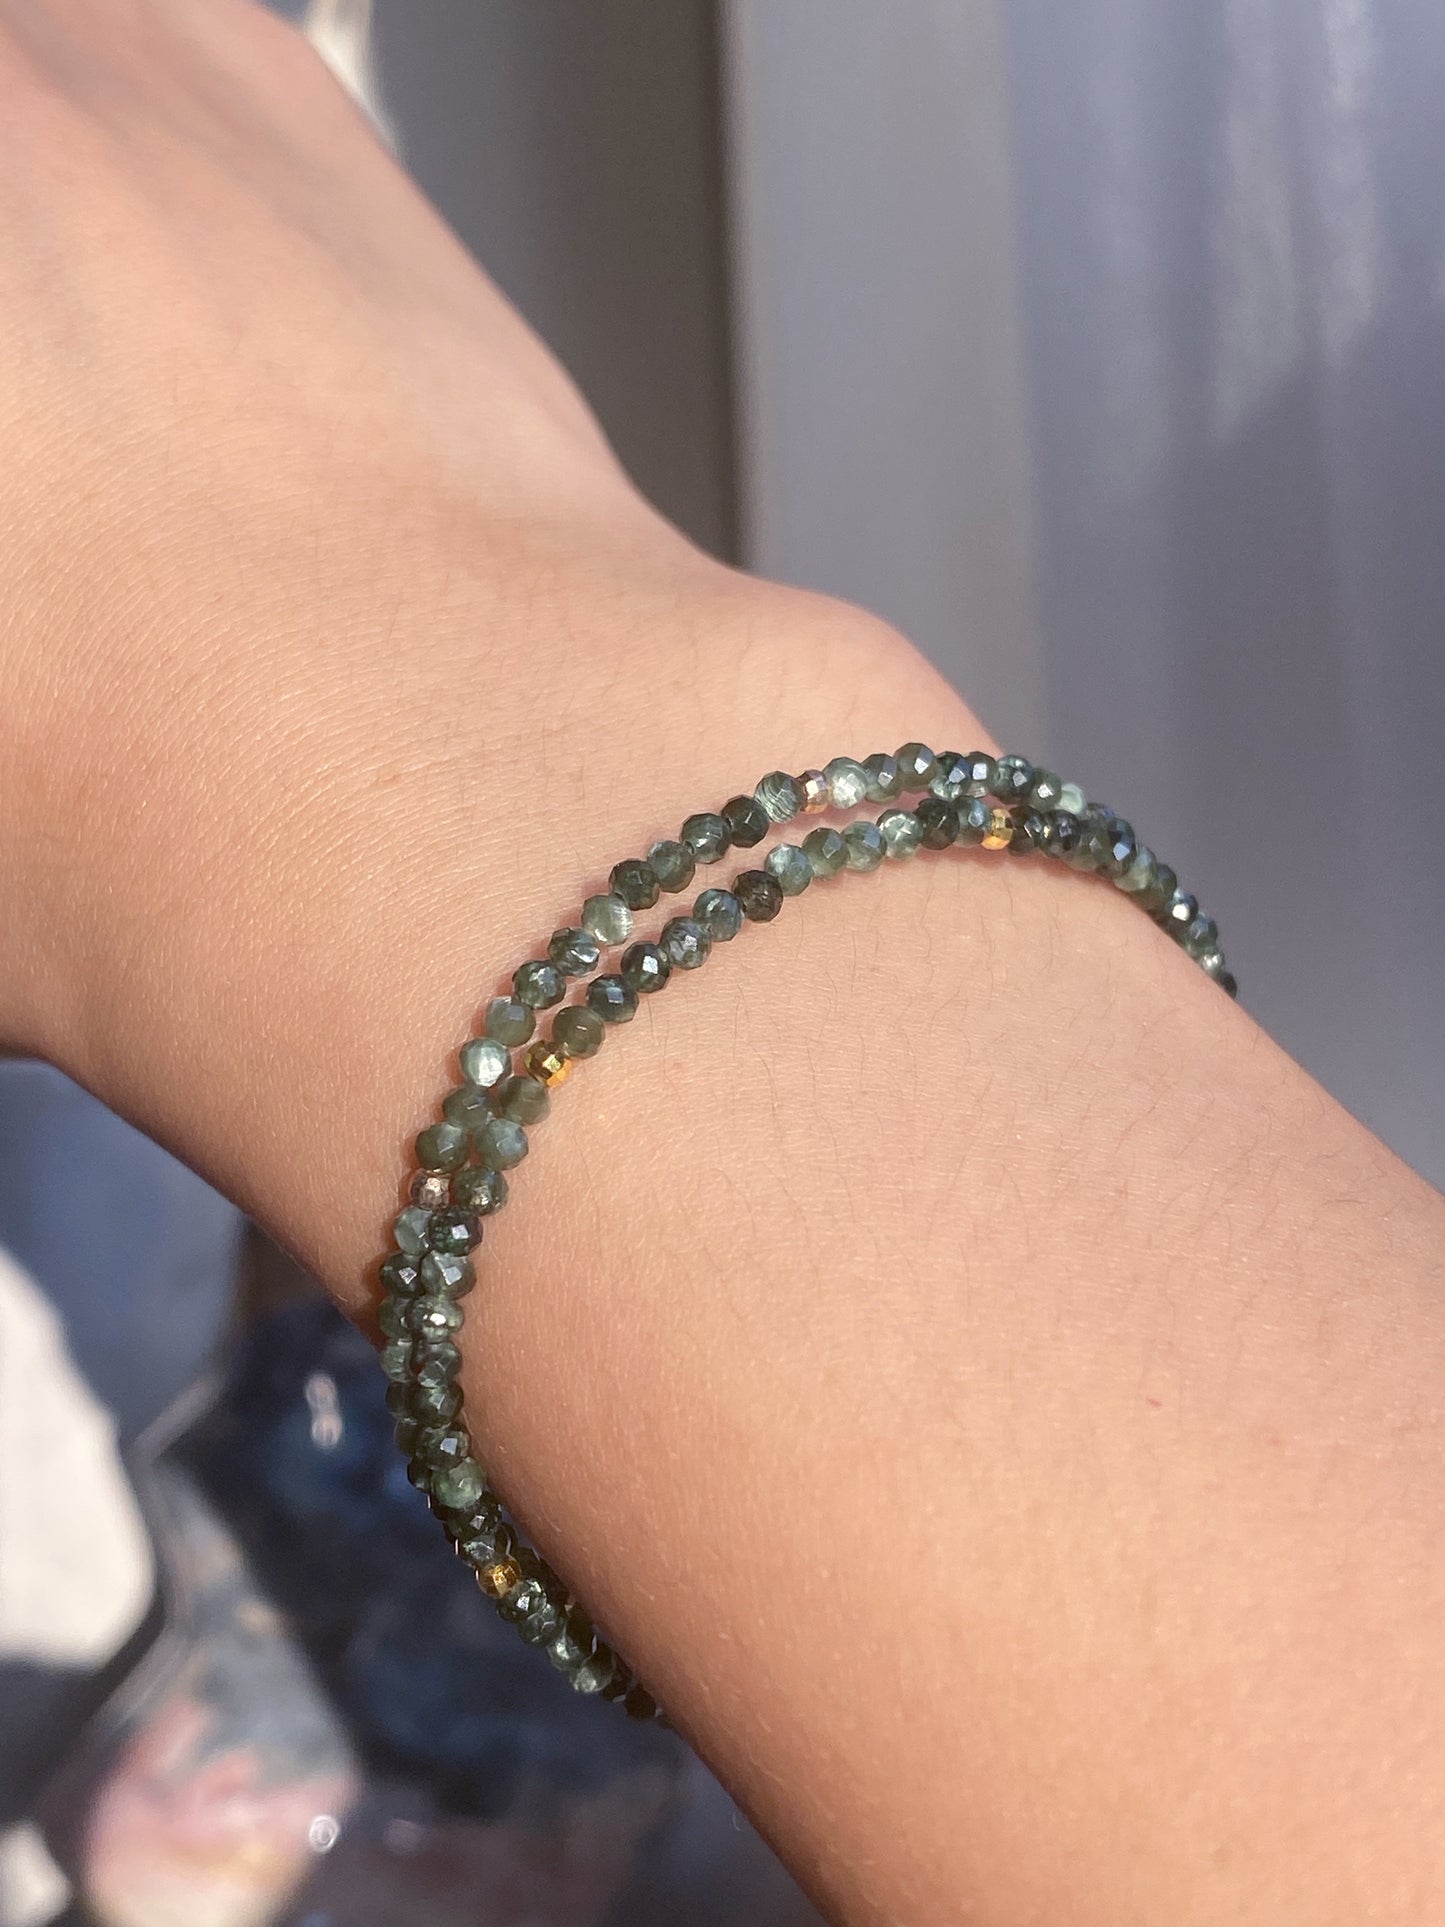 Care Band Seraphinite Faceted Bracelet